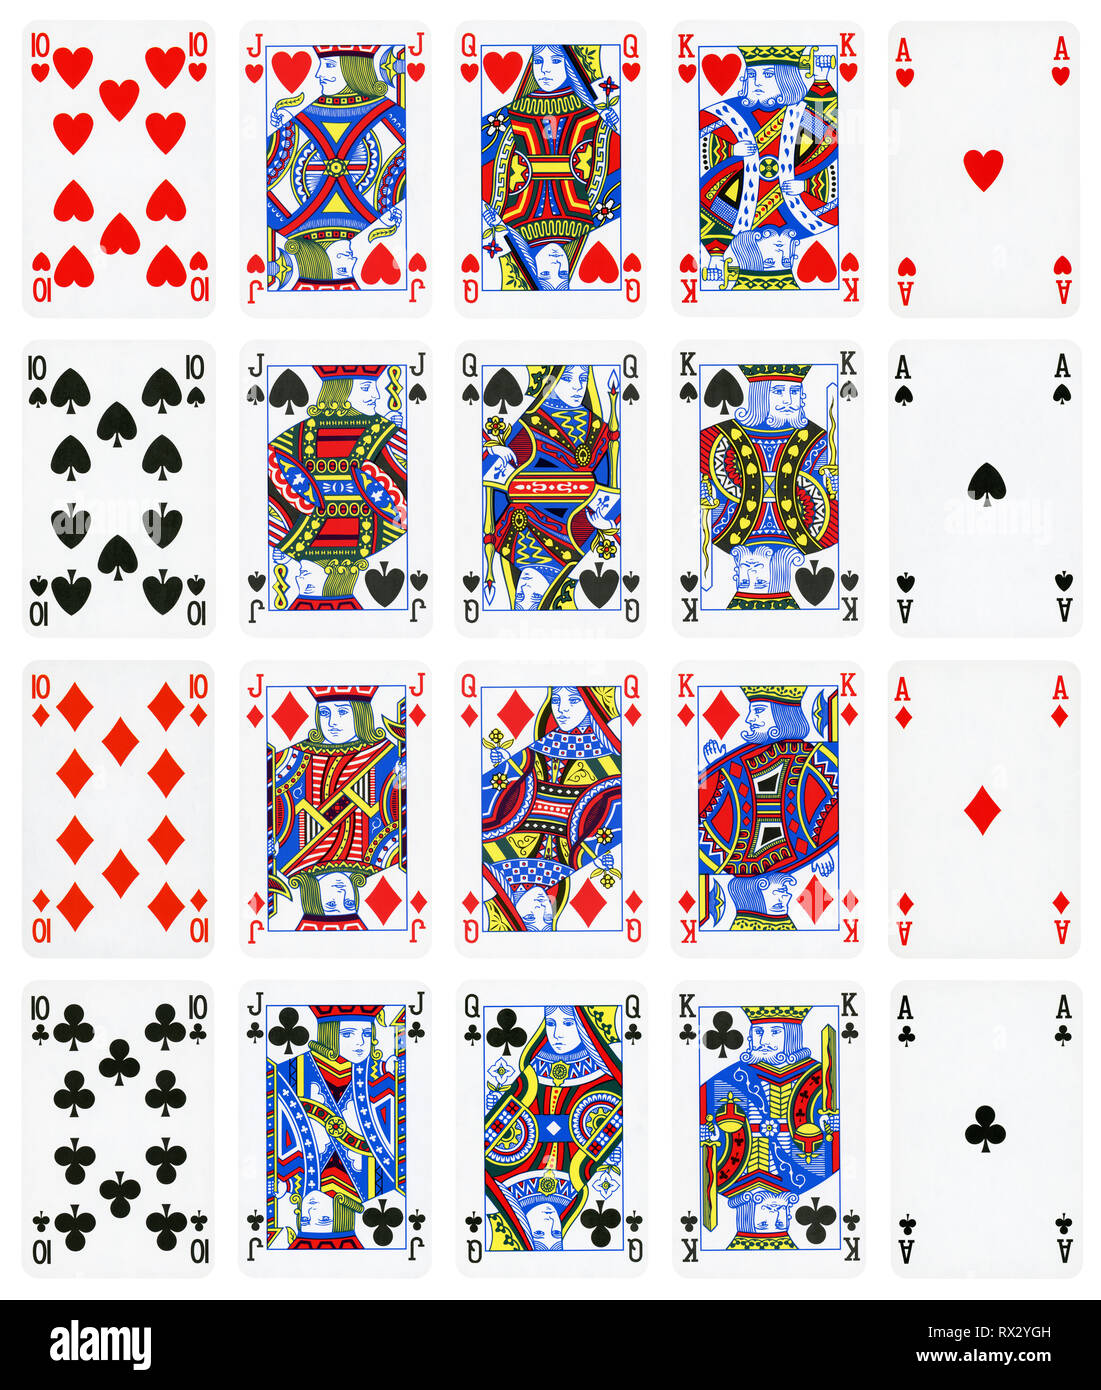 Set of playing cards vector: Ten, Jack, Queen, King, Ace Stock Vector by  ©rlmf.net 92459204